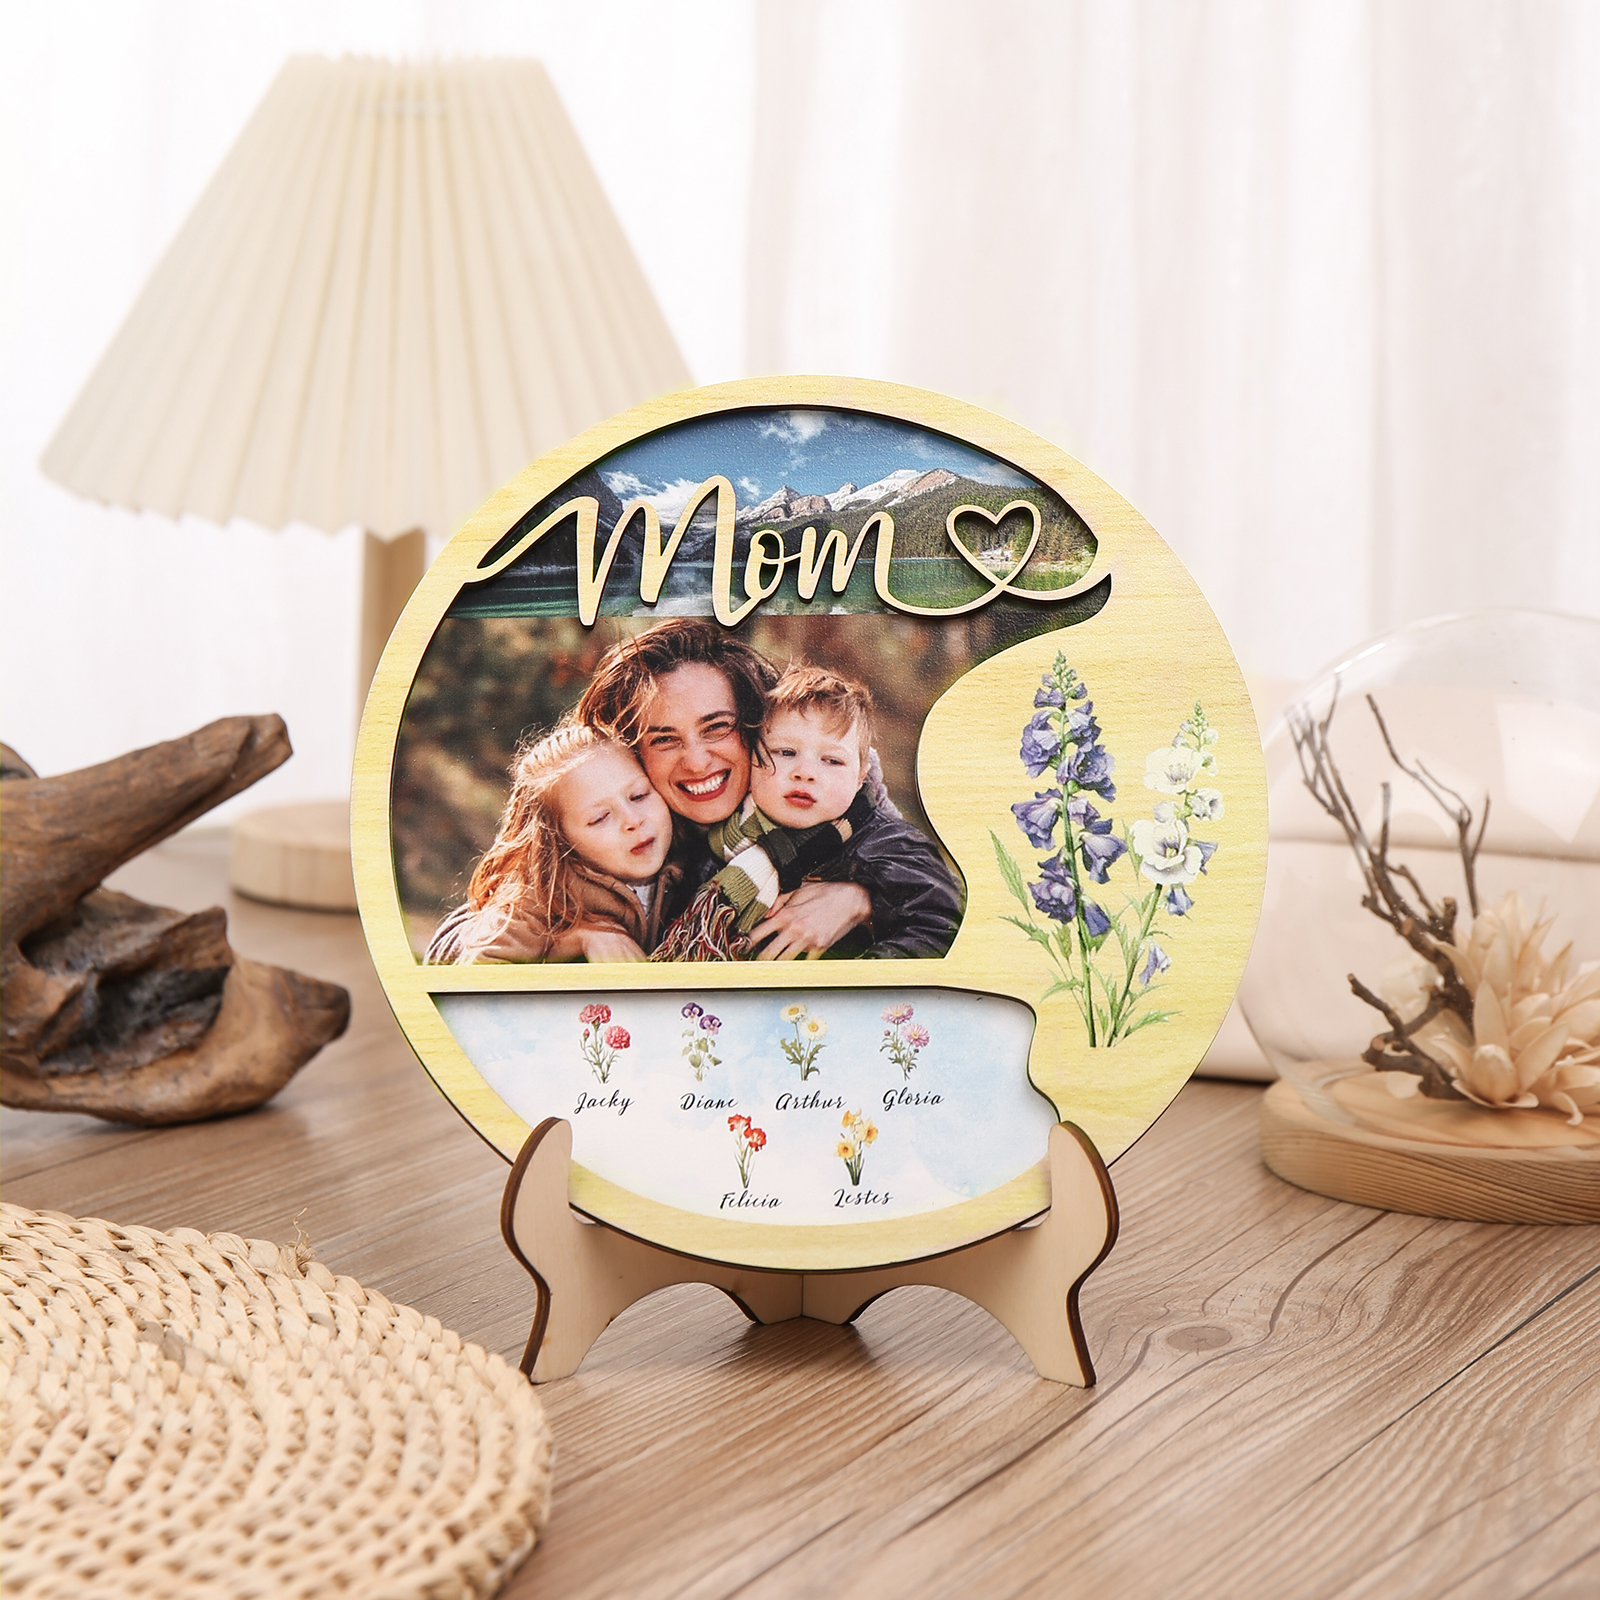 6 Names - Customized Photo Birth Flower Wooden Ornament Decoration for